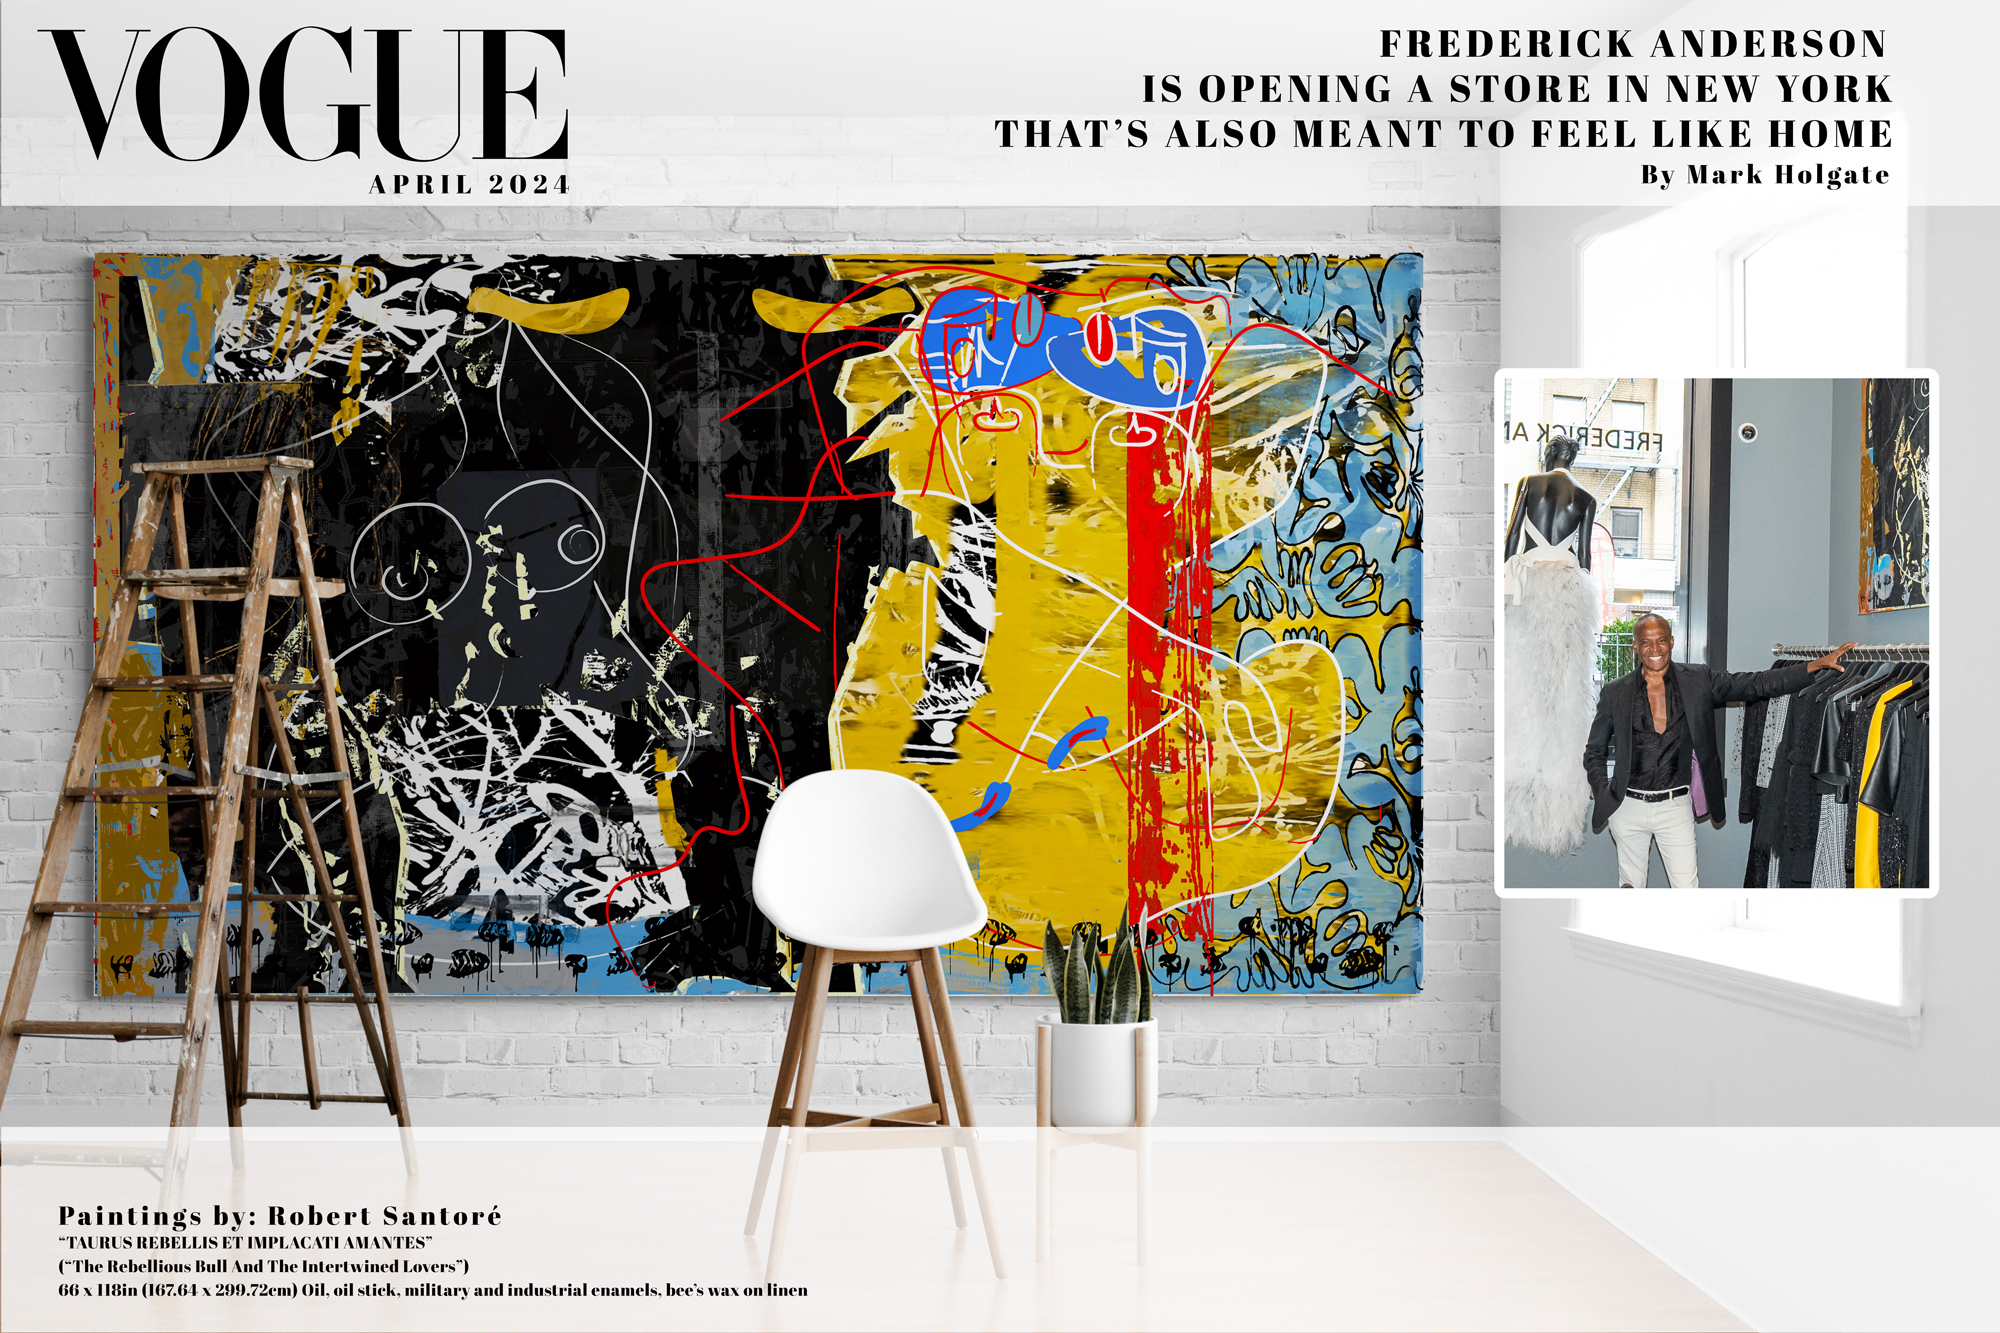 VOUGE Frederick Anderson Is Opening a Store in New York That’s Also Meant to Feel Like Home BY MARK HOLGATE Paintings by Robert Santoré